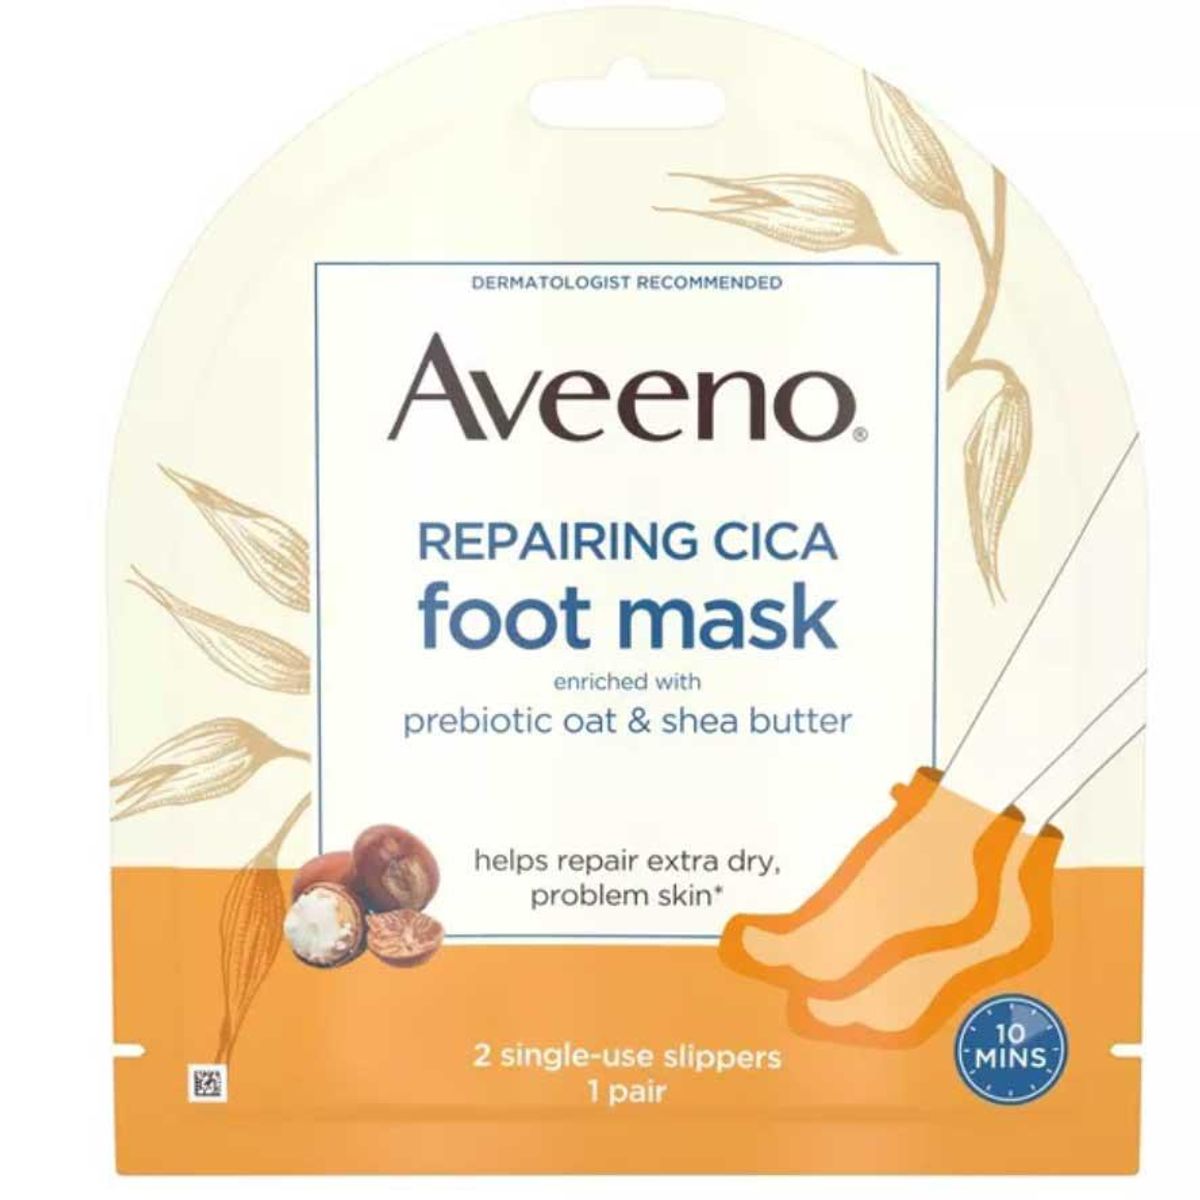 aveeno repairing cica foot mask with oat and shea butter